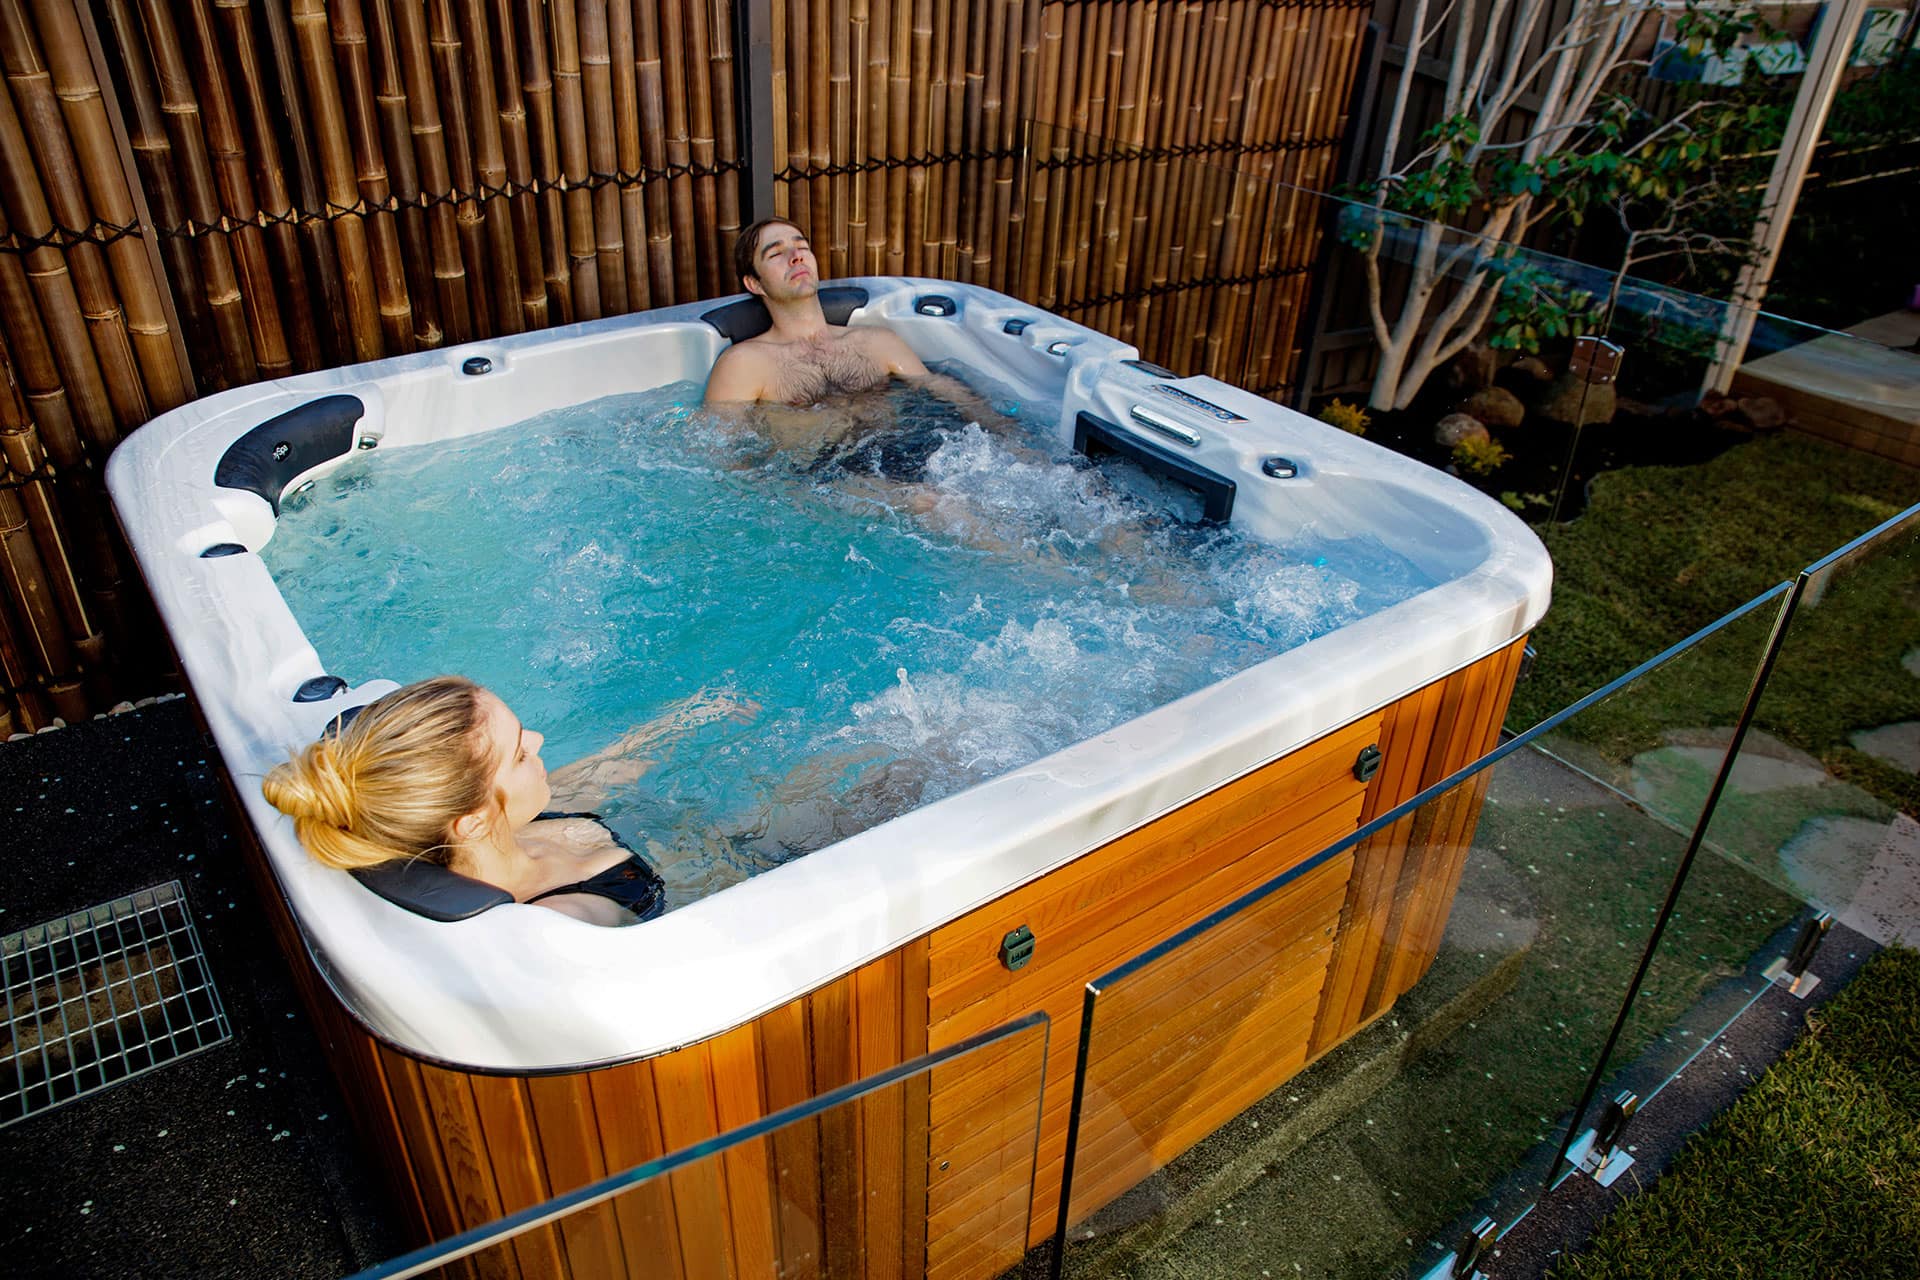 paramount-pools-and-spas-in-waikato-hamilton-new-zealand-services-design-supply-contruction-and-accessories-Sapphire-spas-gallery-19